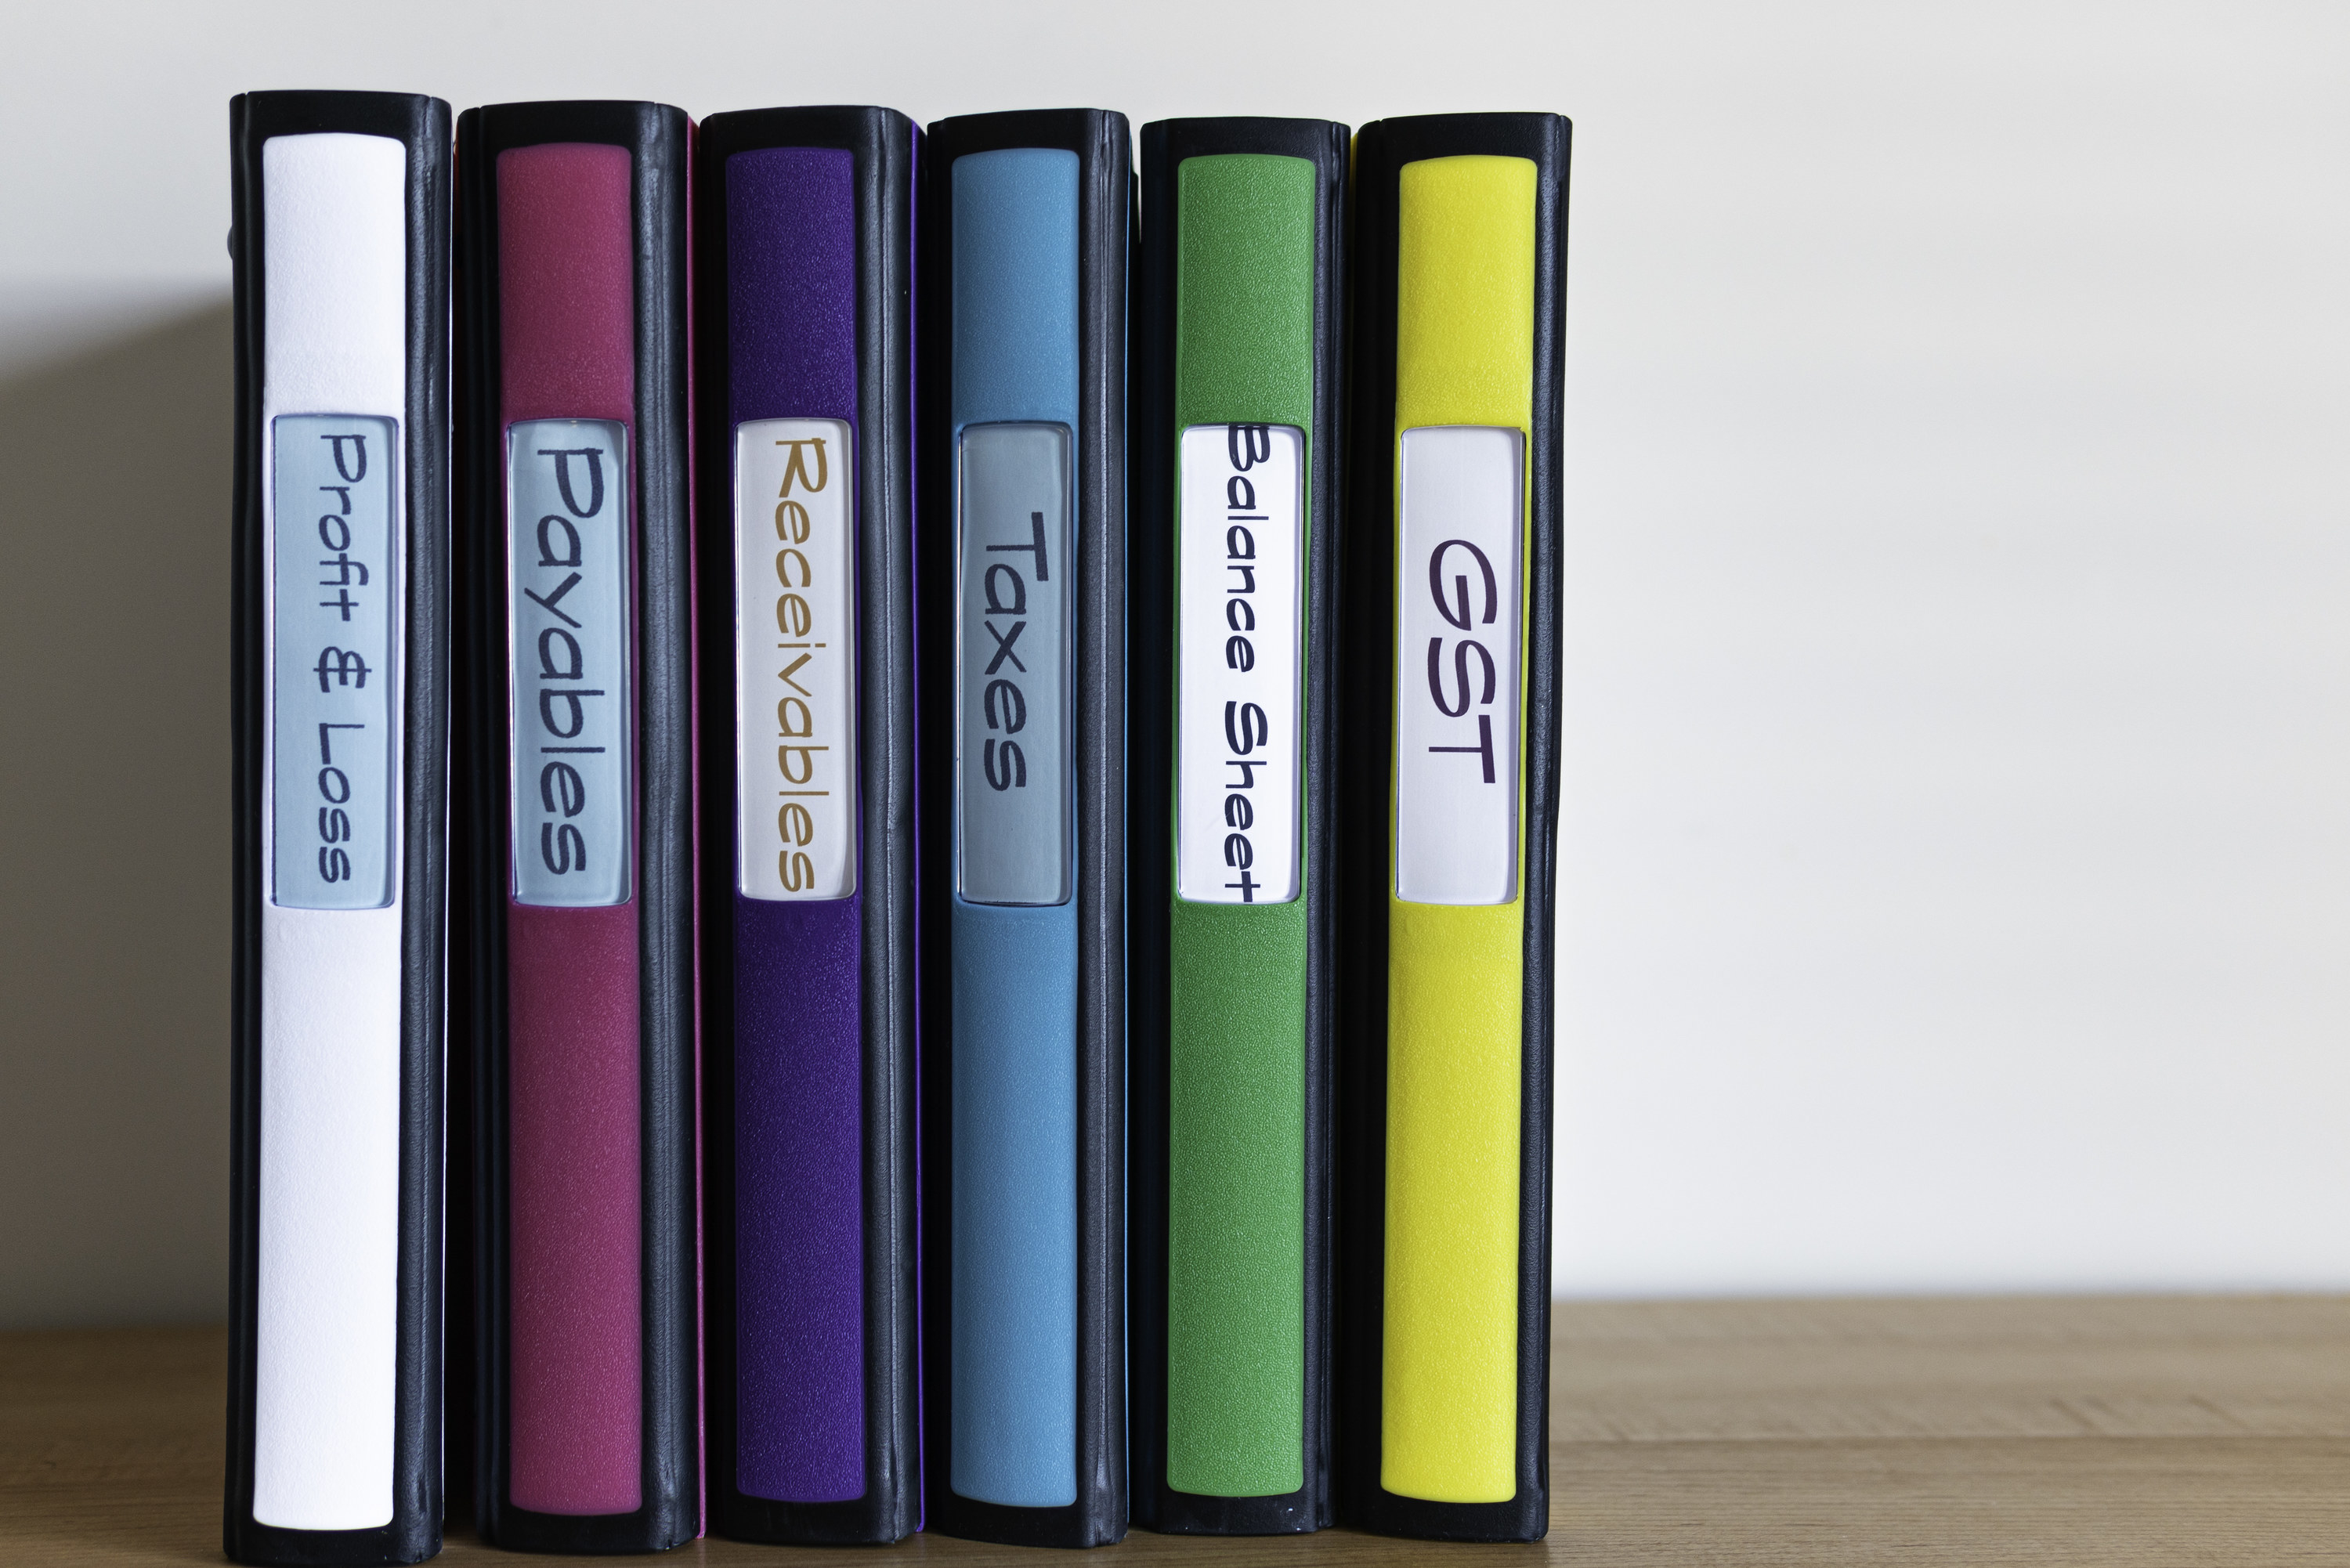 A set of color-coded and labelled binders standing upright on a wooden table